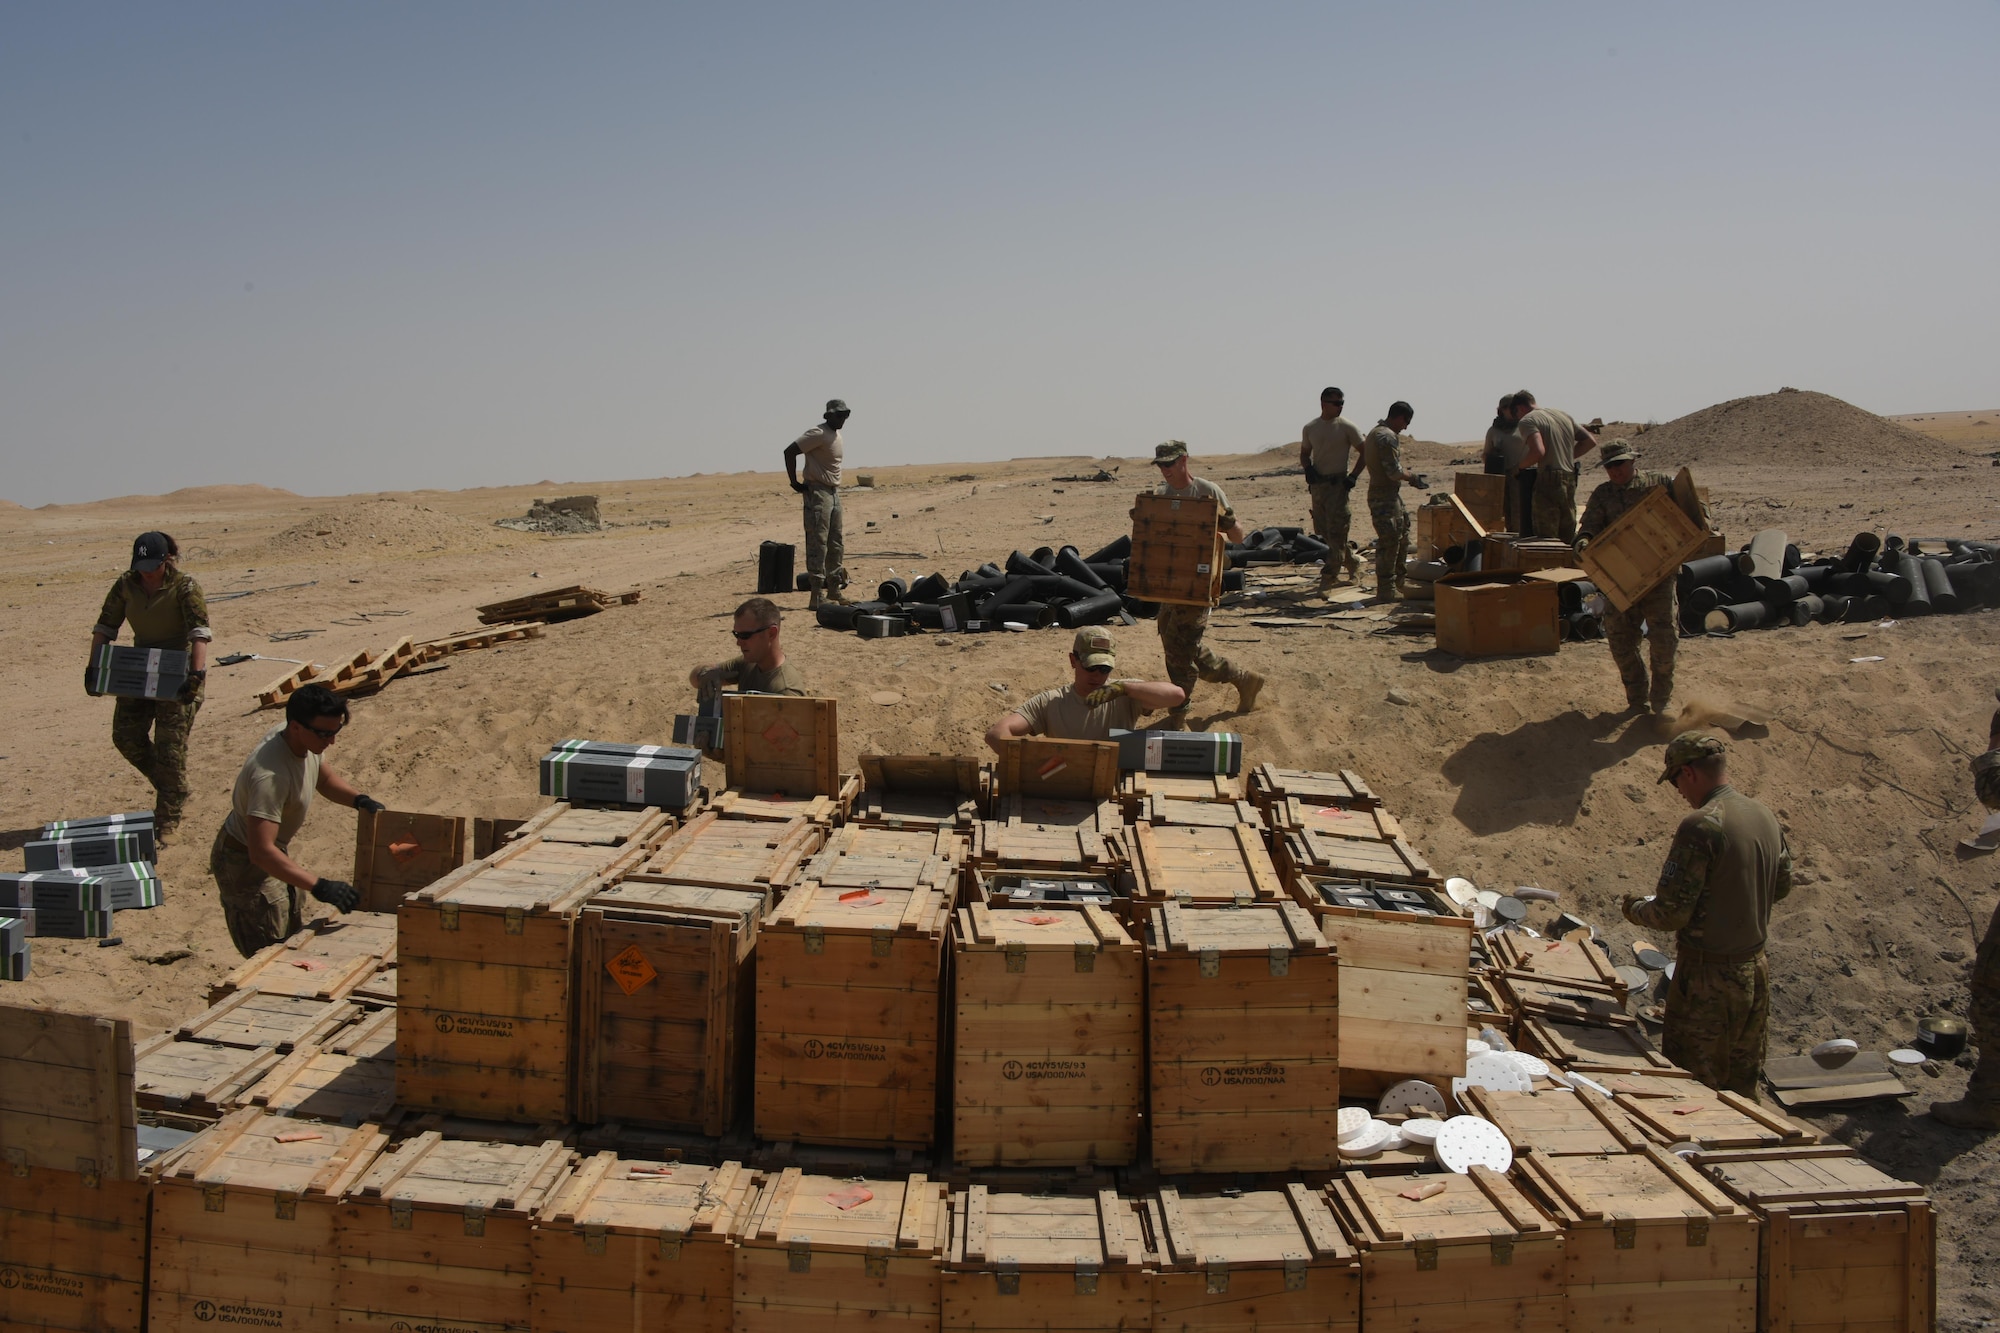 A group of Explosive Ordnance Disposal technicians, ammunition personnel and firefighters from the 386th Air Expeditionary Wing worked together to dispose of a truckload of ordnances in a safe manner at an undisclosed location in Southwest Asia, May 11, 2017. The stockpile of expired munitions consisting primarily of flares was transported to an isolated location where the unserviceable items were stacked in a man-made hole in preparation for destruction. (U.S. Air Force photo/ Tech. Sgt. Jonathan Hehnly)